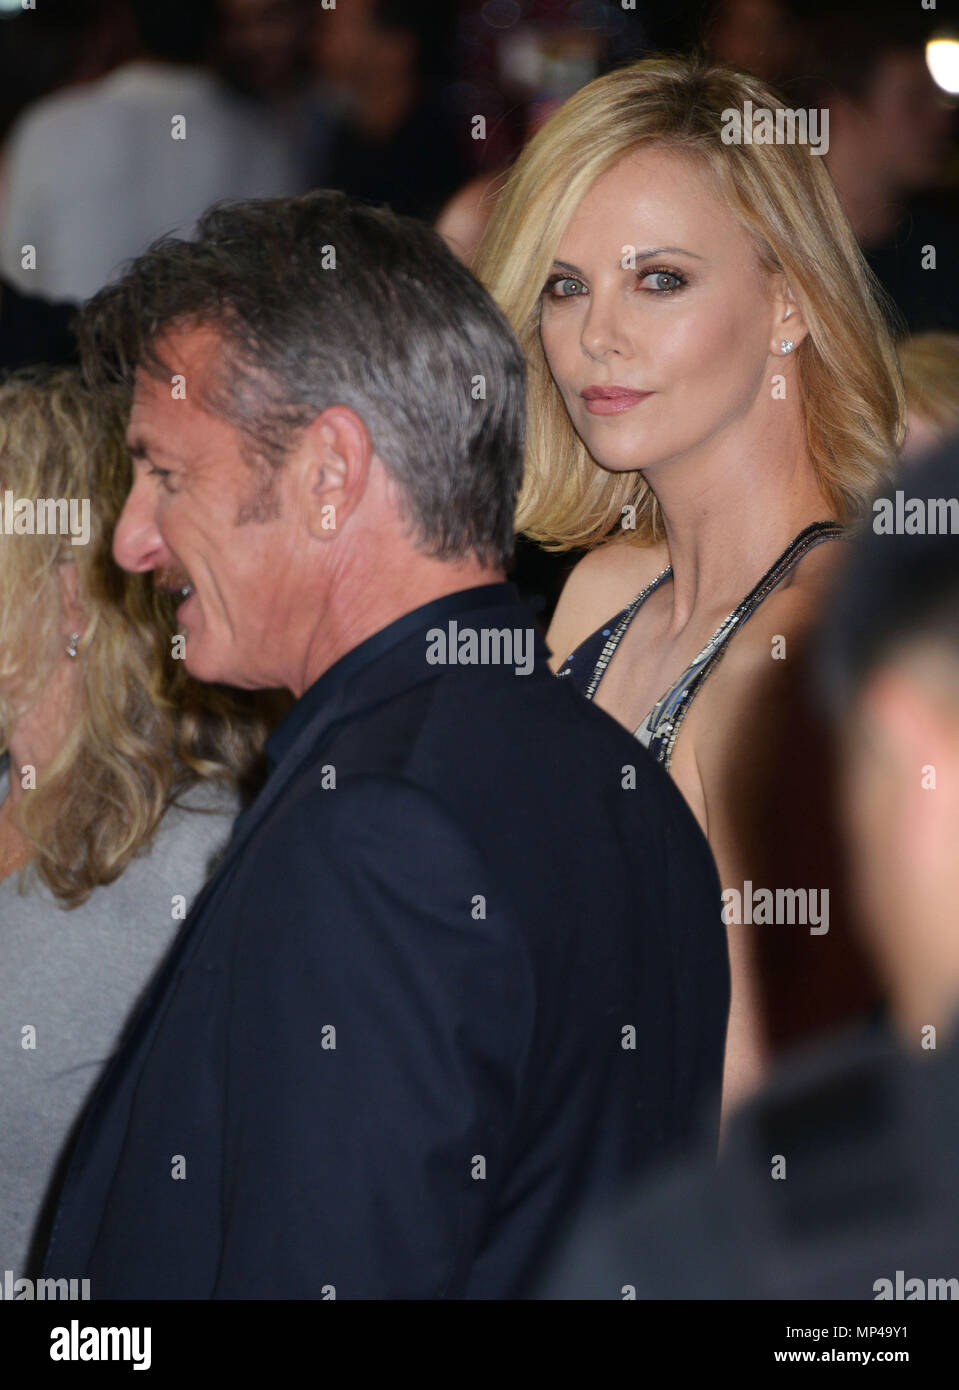 Sean Penn, Charlize Theron 026 at the Gunman Premiere at the Regal Theatre in Los Angeles.Sean Penn, Charlize Theron 026 ------------- Red Carpet Event, Vertical, USA, Film Industry, Celebrities,  Photography, Bestof, Arts Culture and Entertainment, Topix Celebrities fashion /  Vertical, Best of, Event in Hollywood Life - California,  Red Carpet and backstage, USA, Film Industry, Celebrities,  movie celebrities, TV celebrities, Music celebrities, Photography, Bestof, Arts Culture and Entertainment,  Topix, vertical,  family from from the year , 2015, inquiry tsuni@Gamma-USA.com Husband and wif Stock Photo